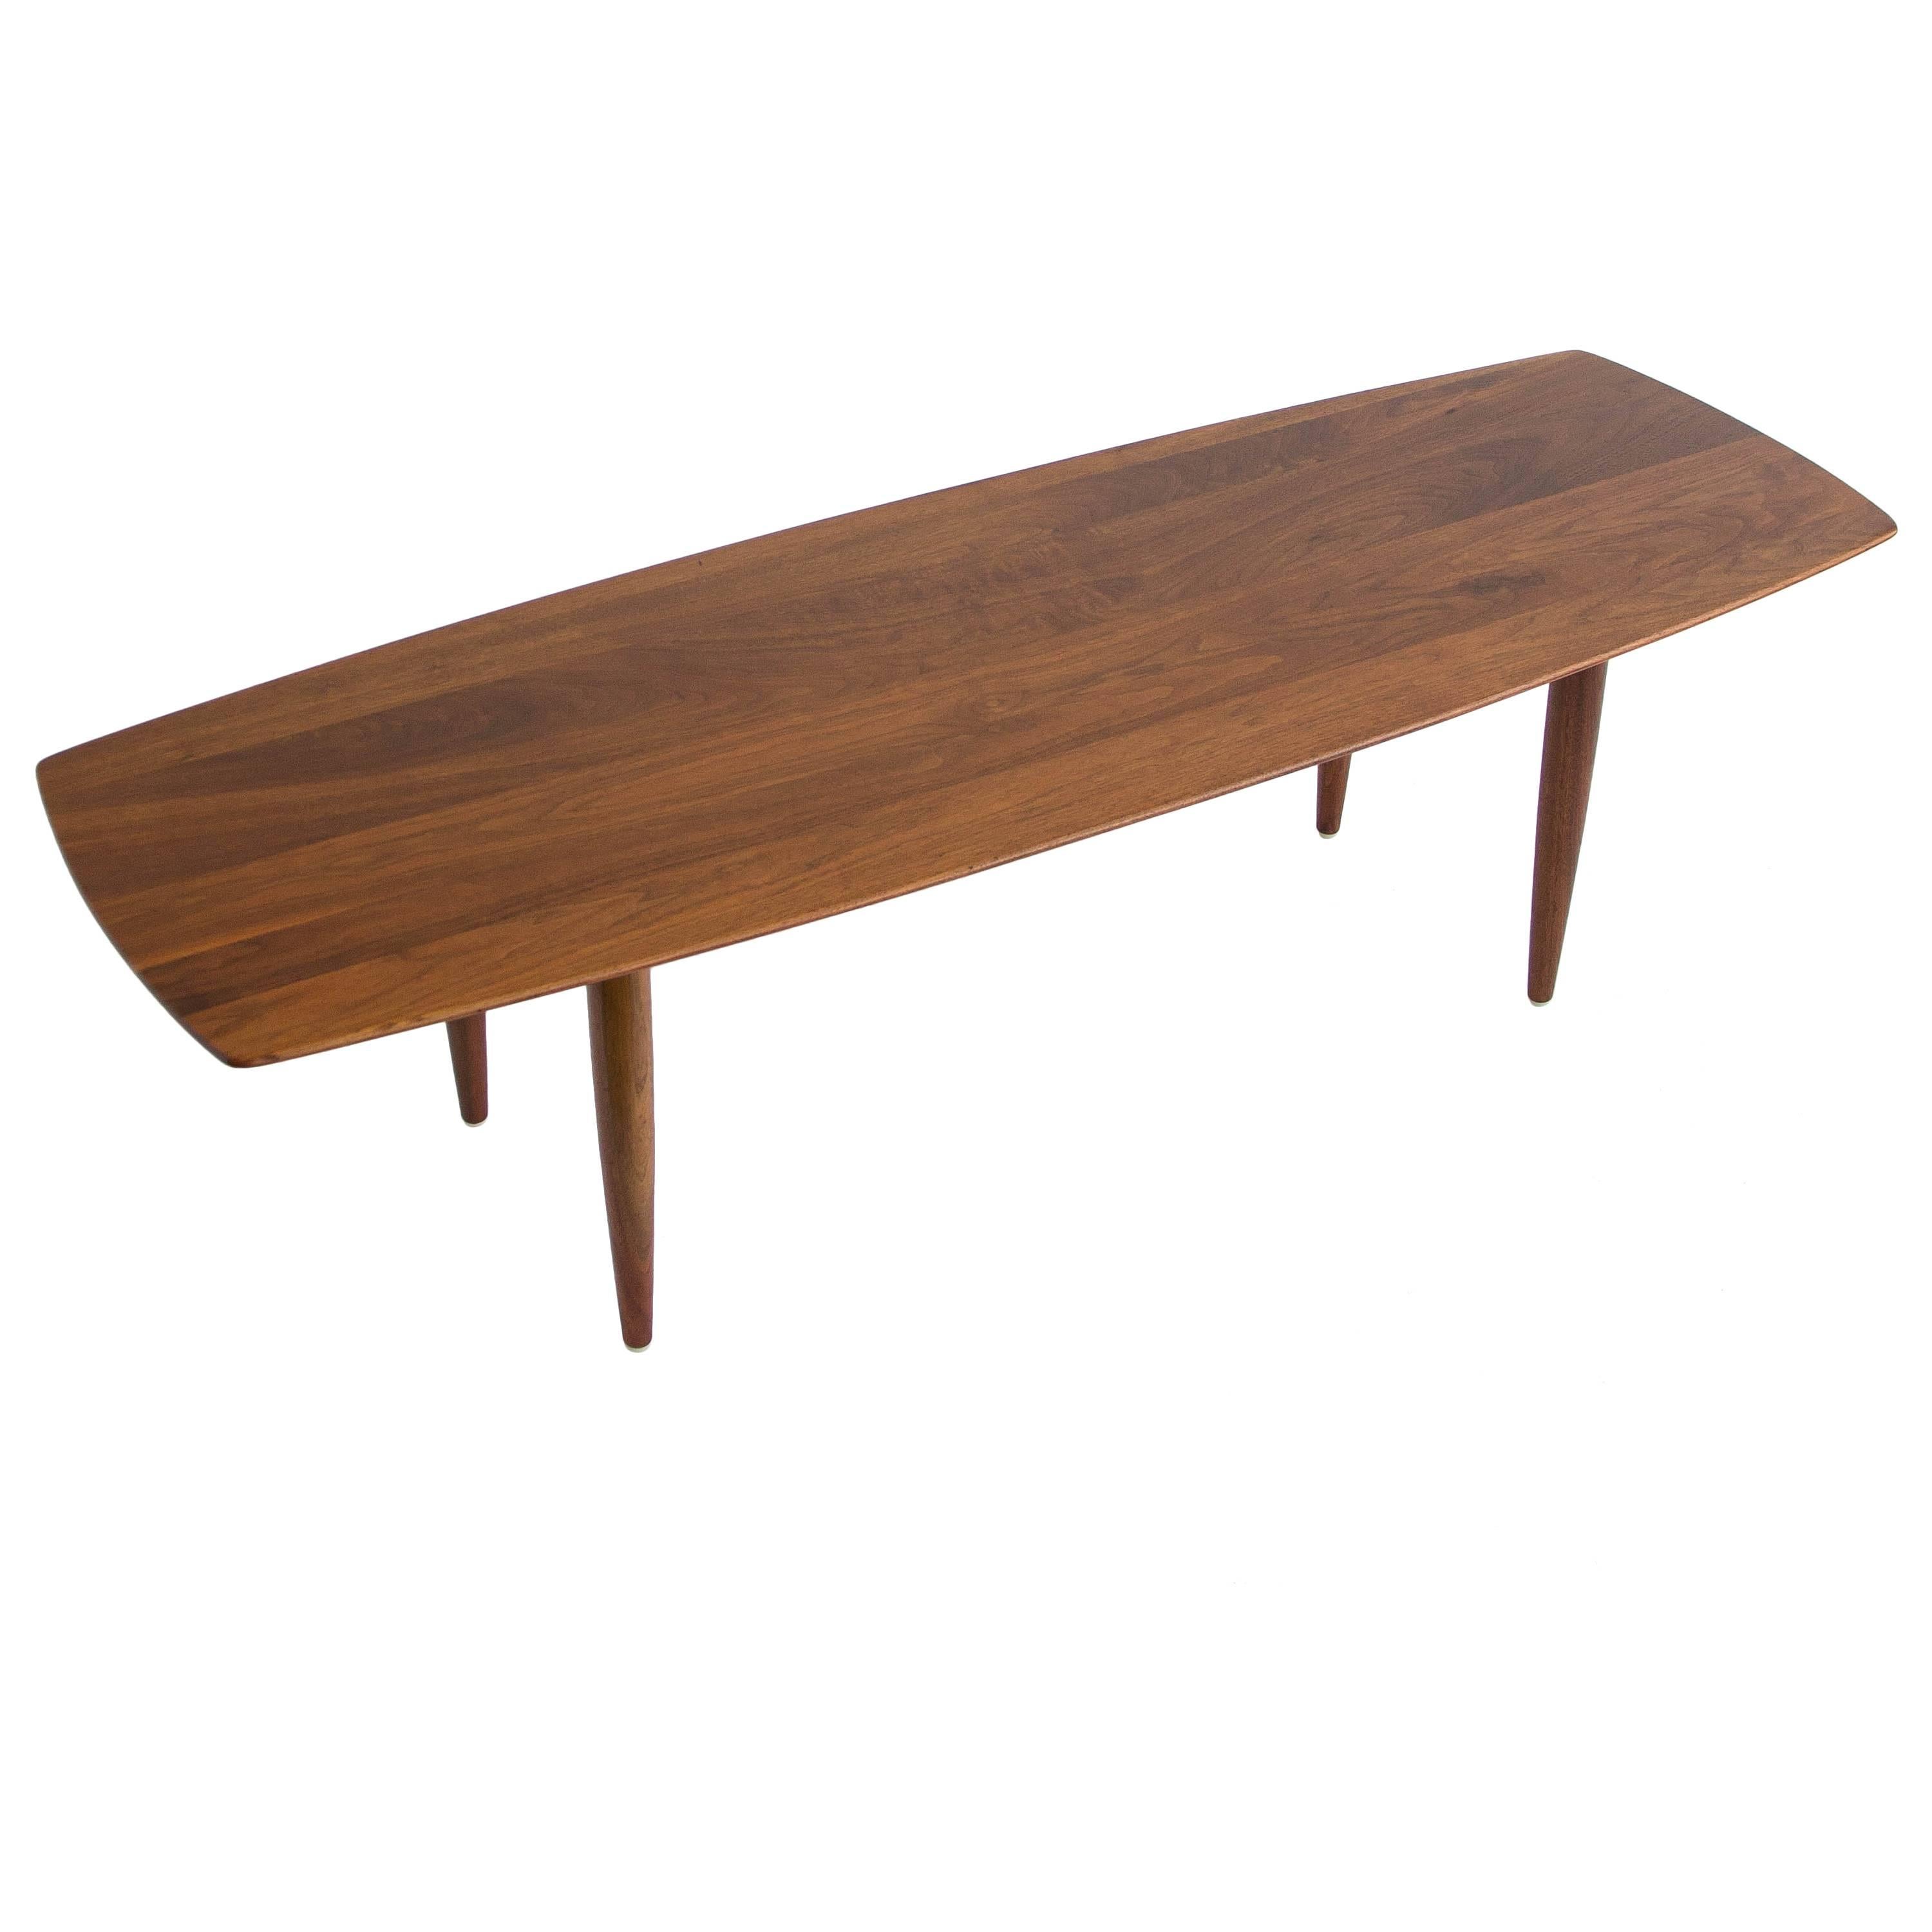 American Made Solid Walnut Surfboard Coffee Table by Prelude